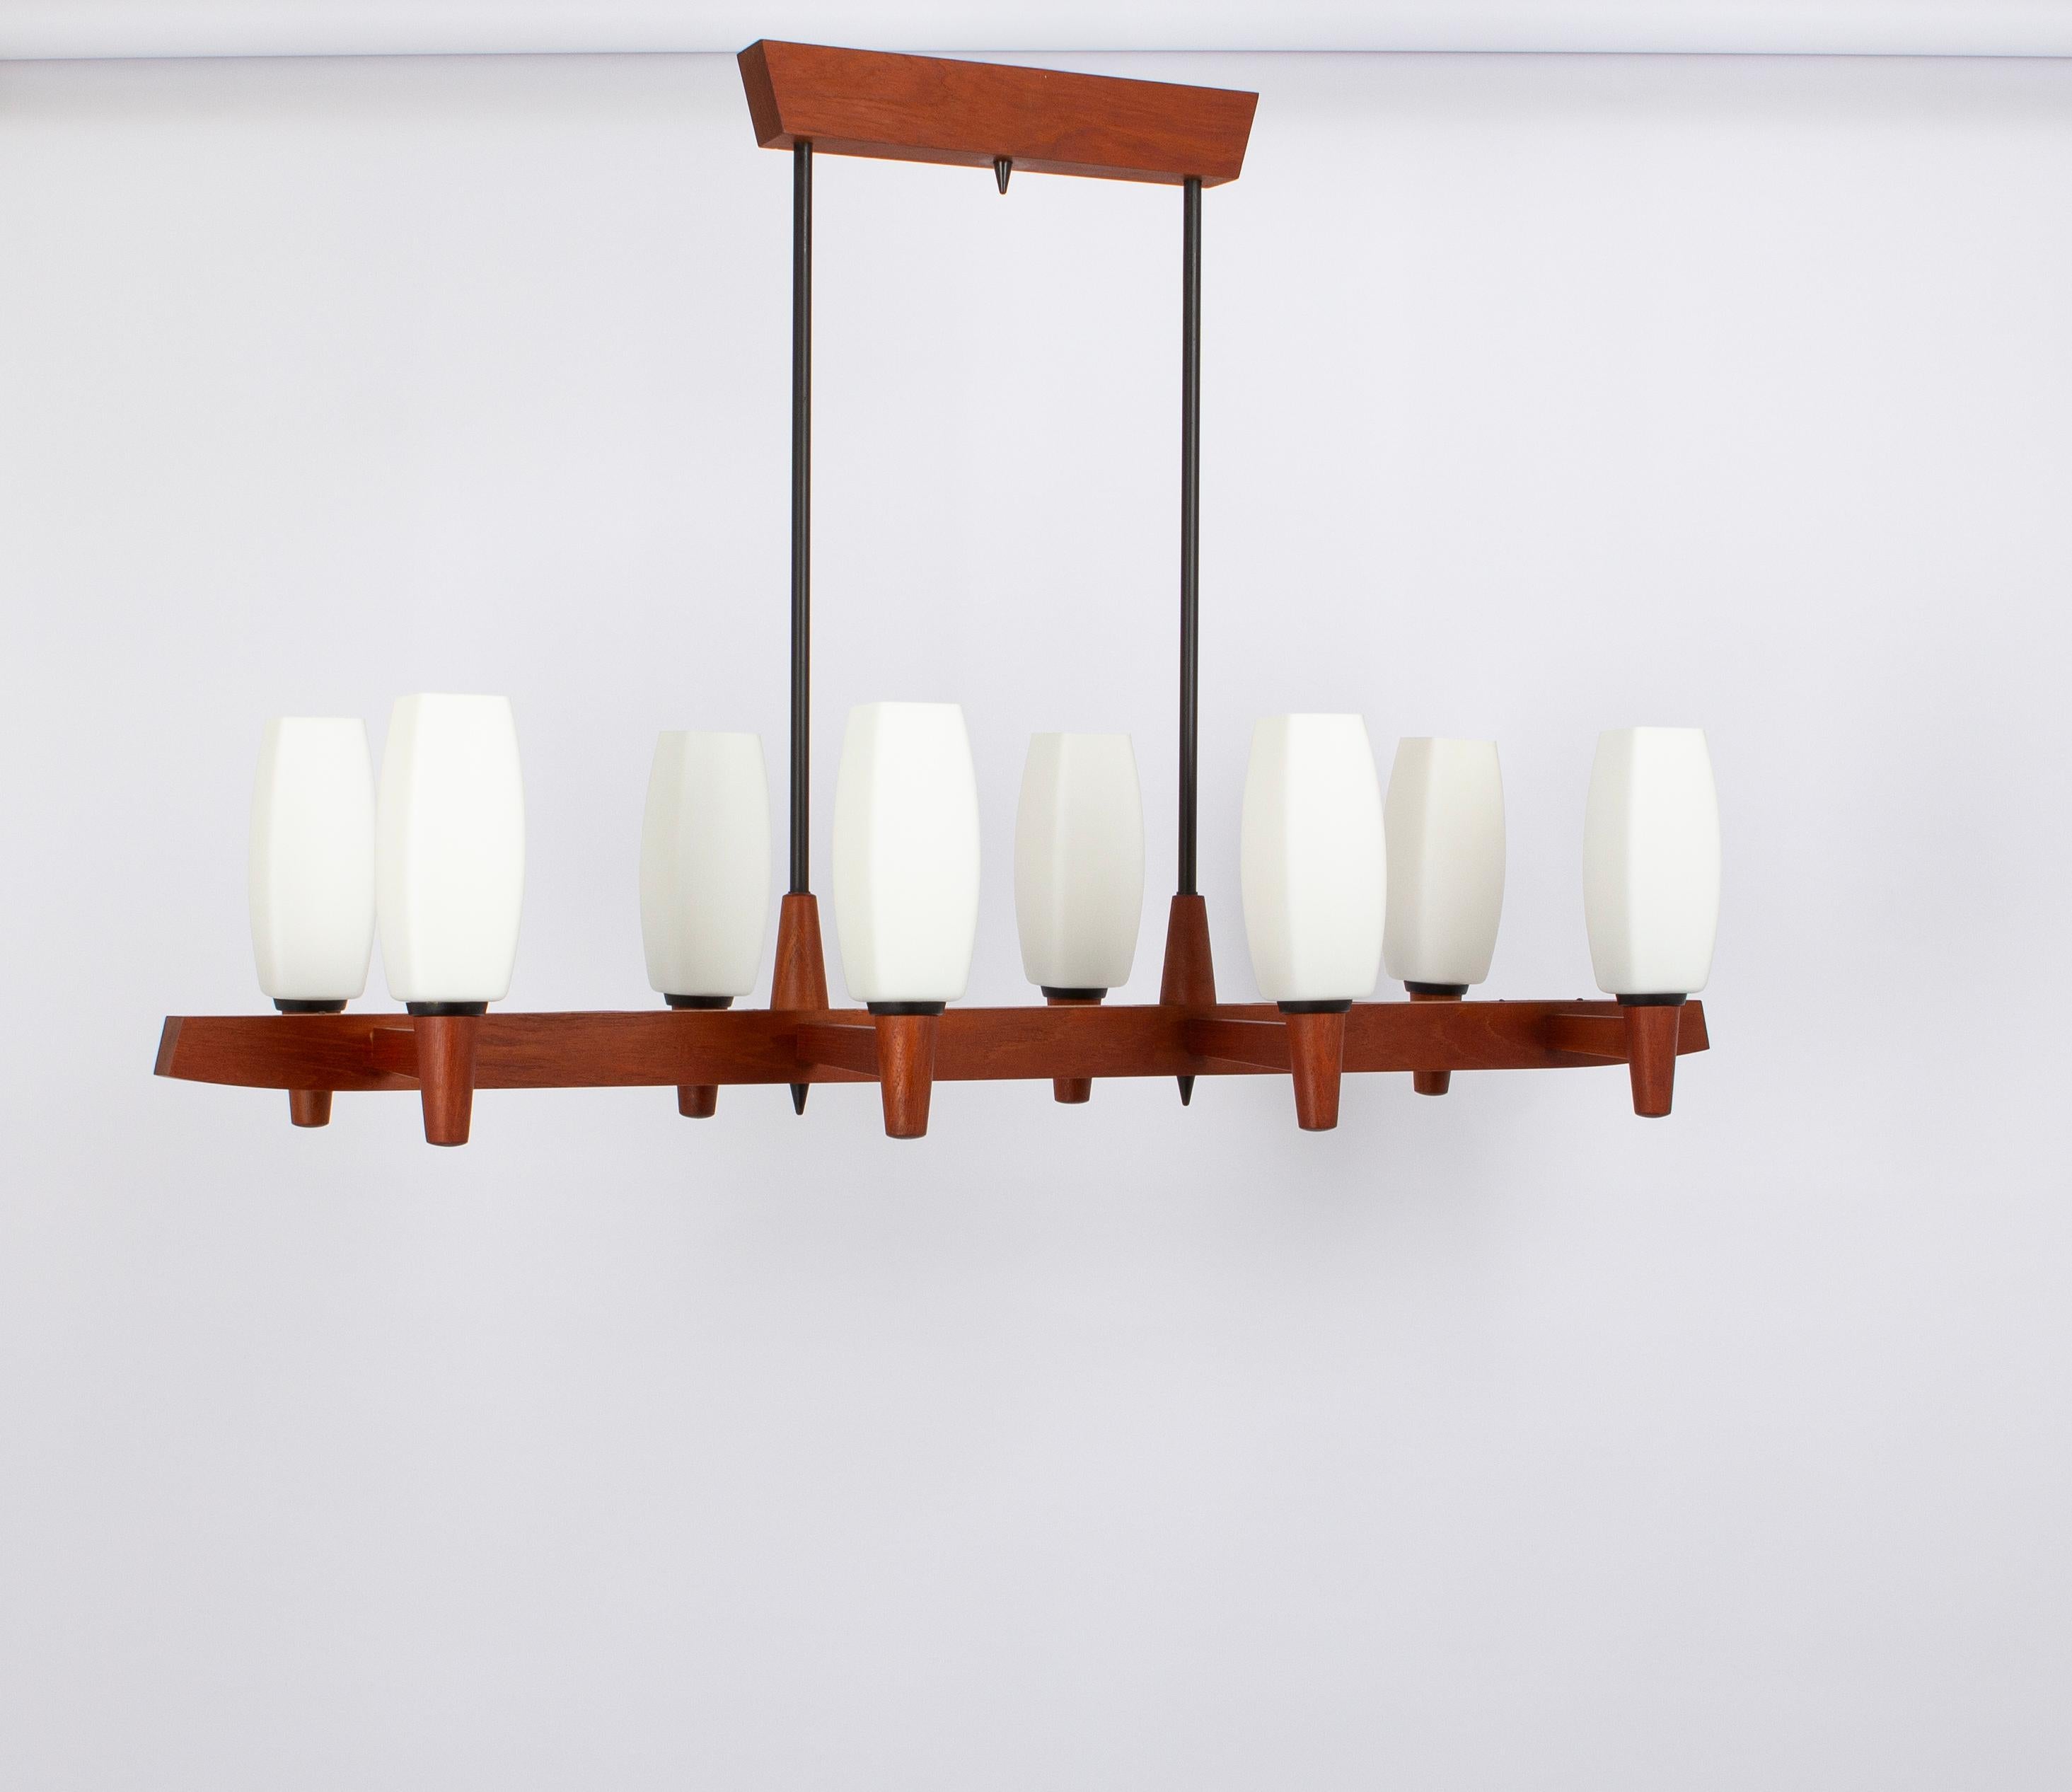 A wonderful midcentury teak chandelier. A unique, timeless and elegant masterpiece of Danish Teak wood designed by Kaiser Leuchten, Germany, 1960s. The light sculpture impresses with clear lines and perfect craftsmanship of the materials wood and